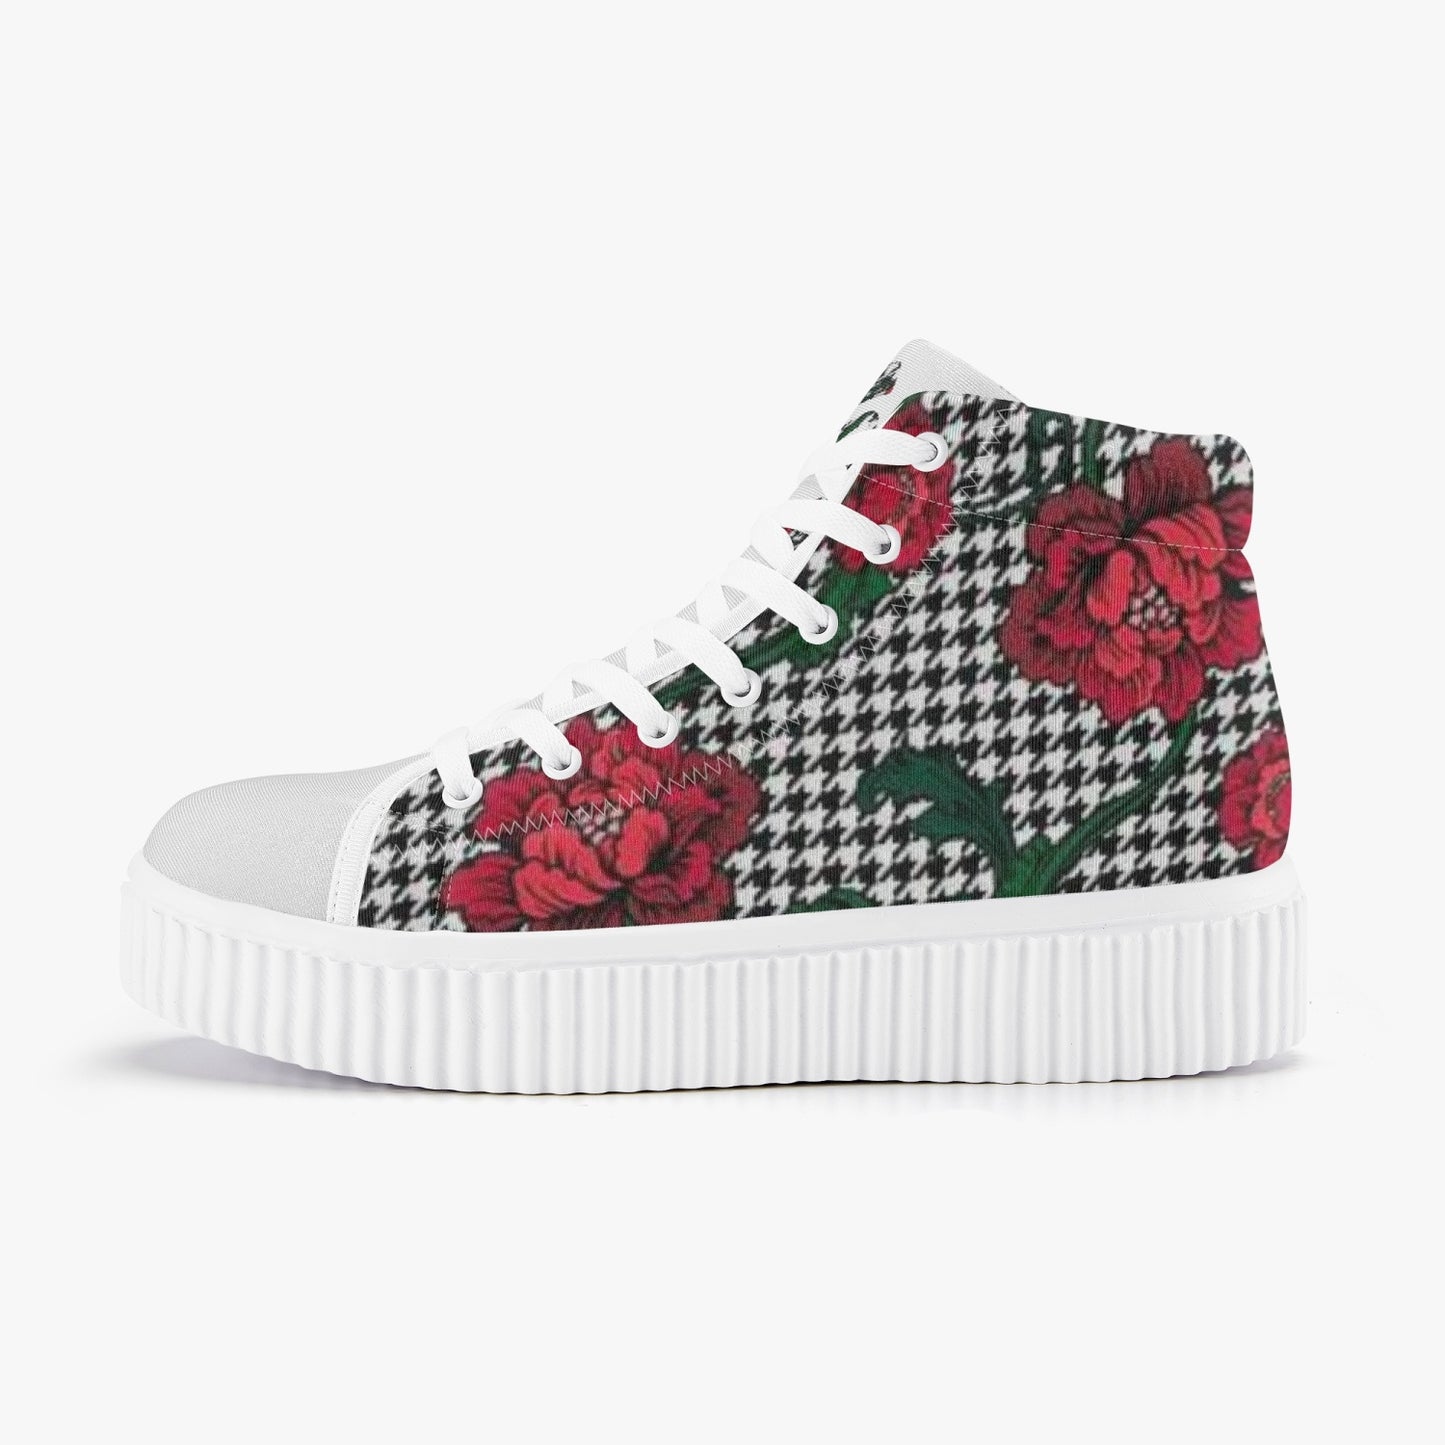 Lady MOGUL "Roses Are Red" Sneakers